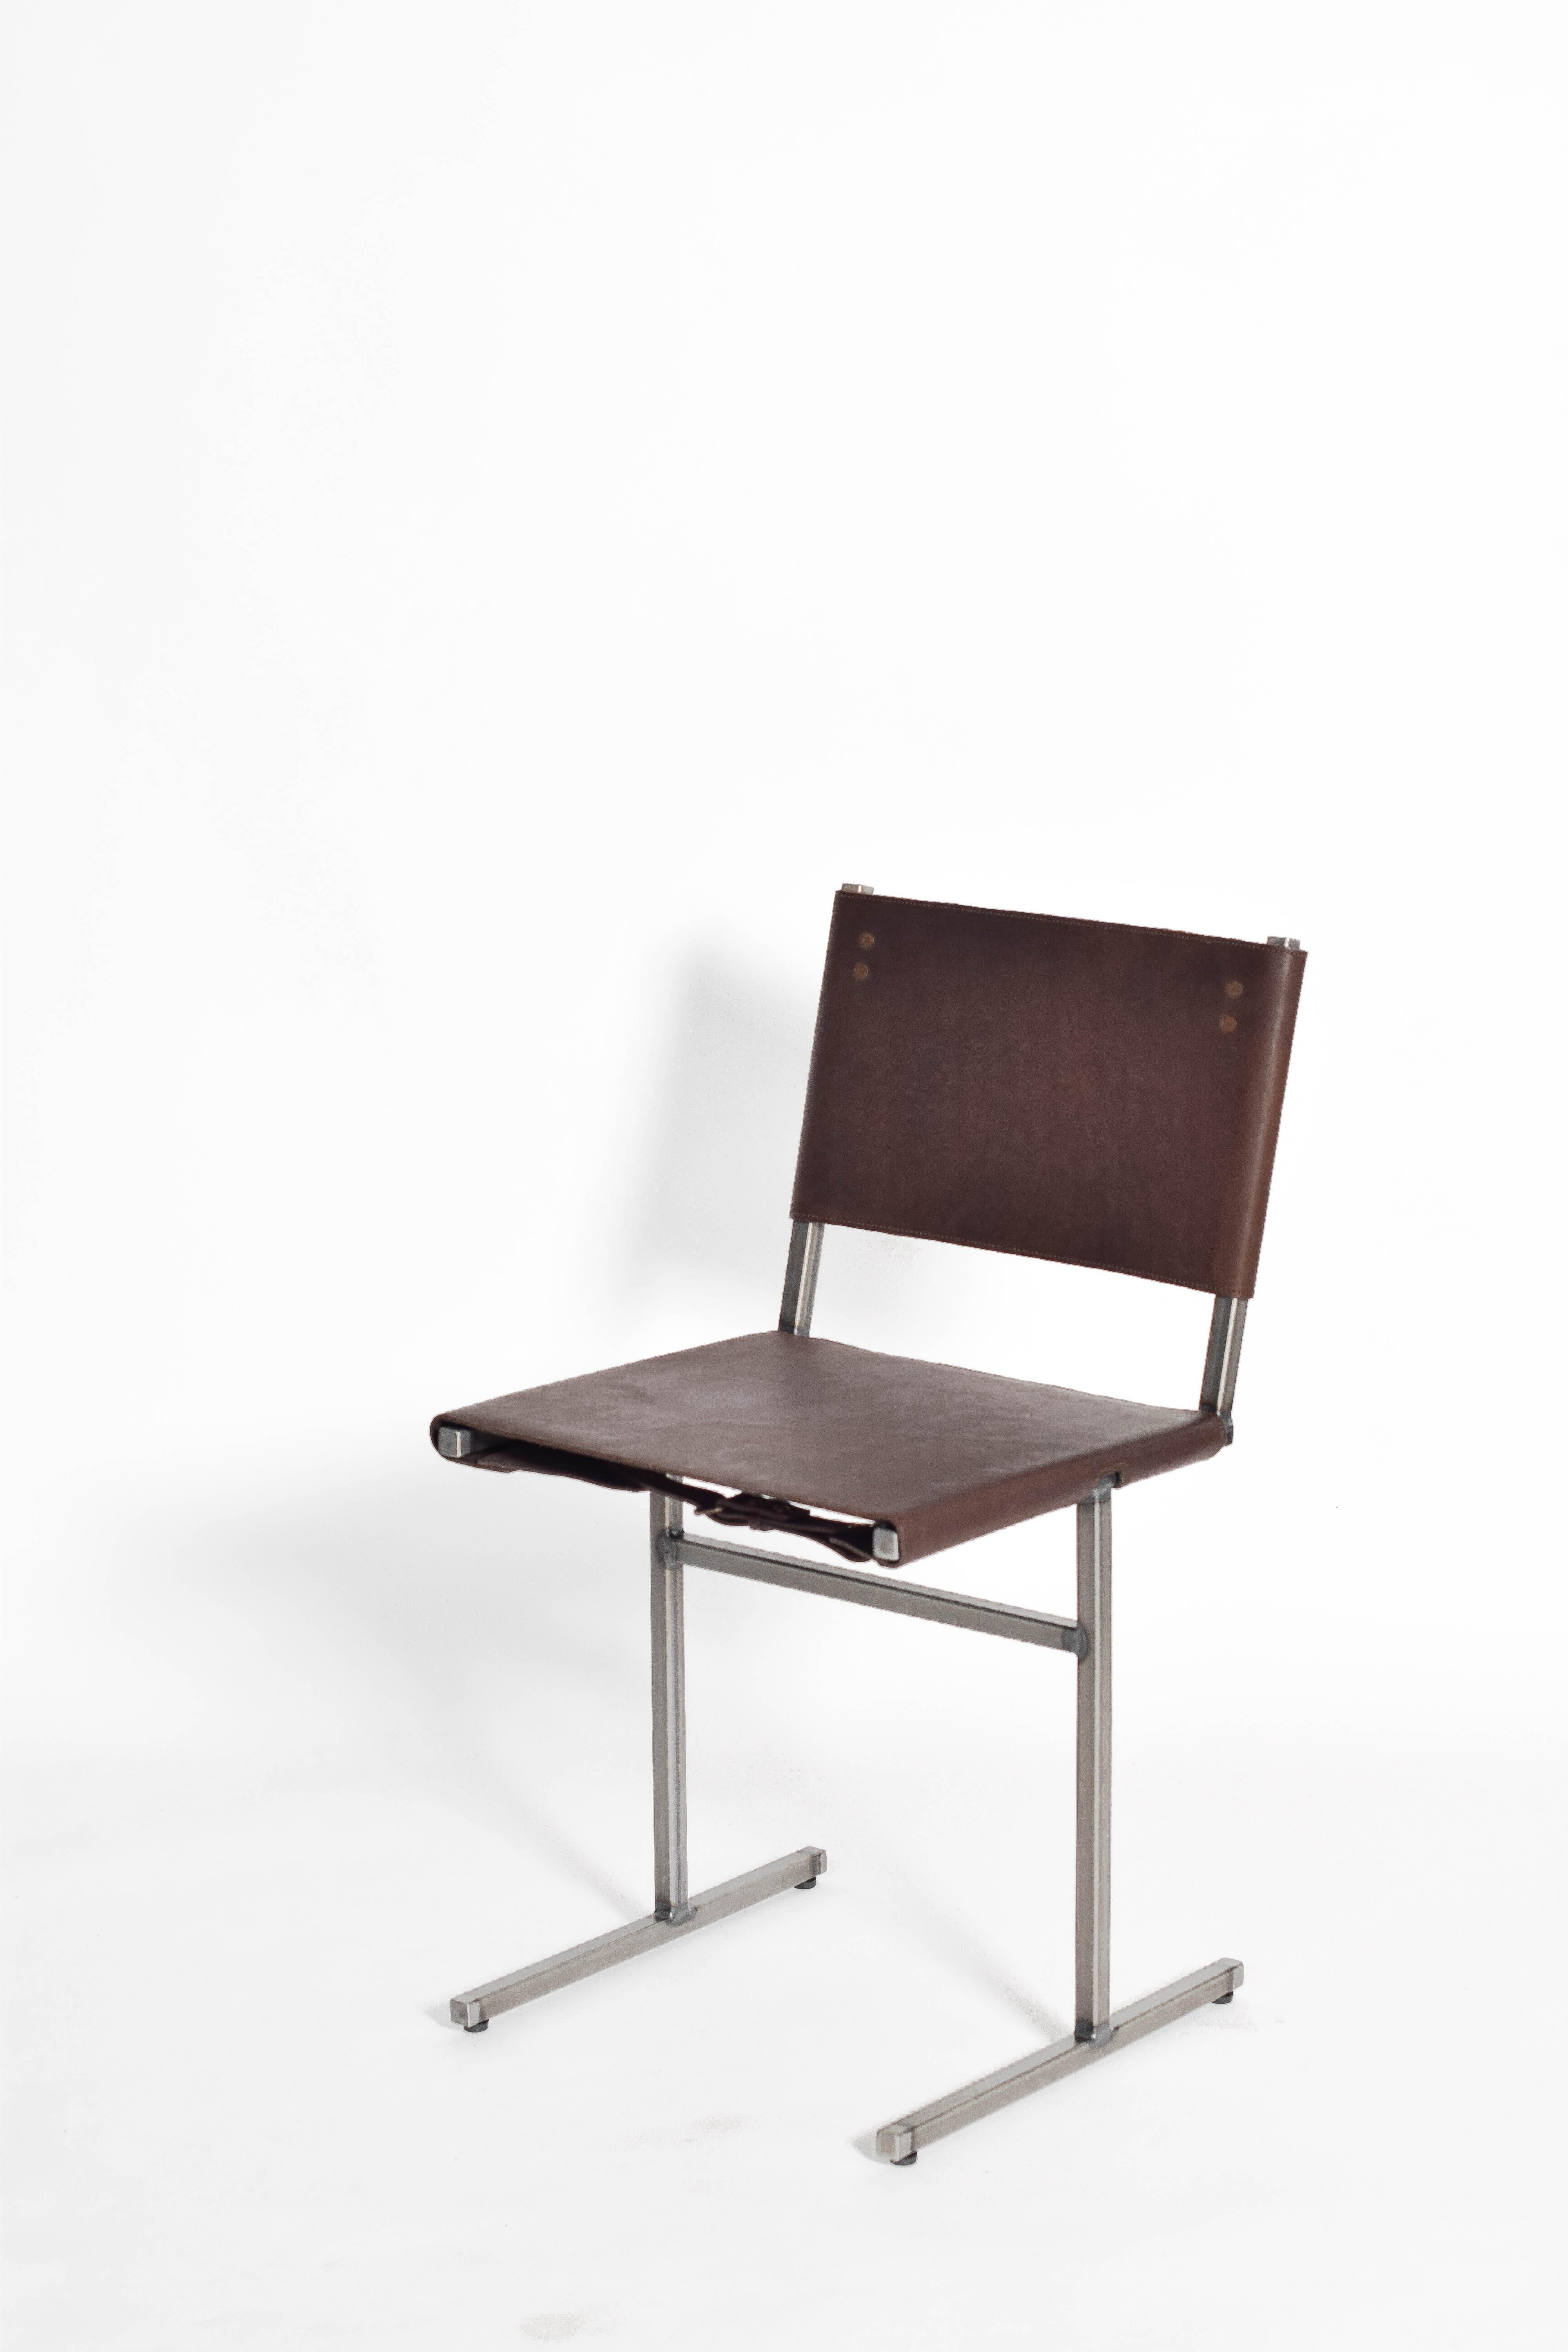 Contemporary Classic Brown and Brass Memento Chair, Jesse Sanderson